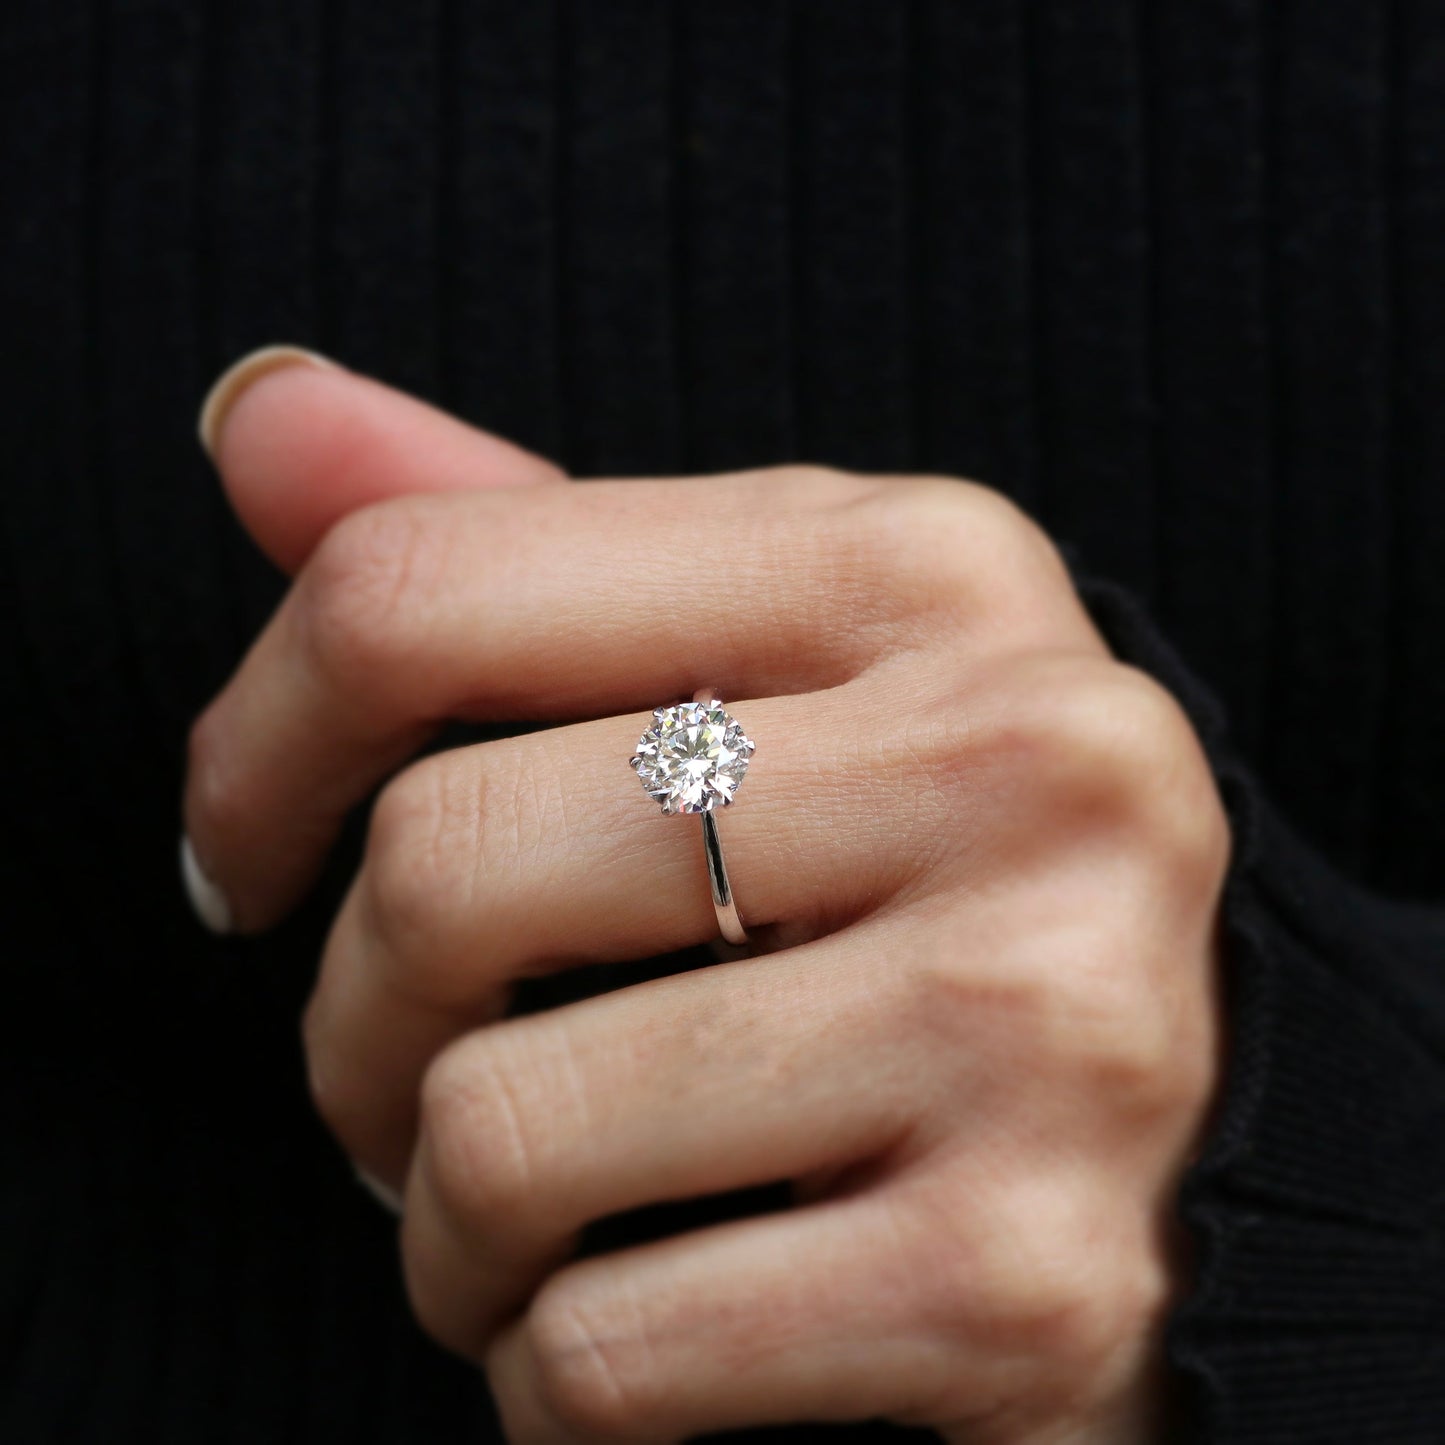 Solitaire Ring Stock Photos and Images - 123RF